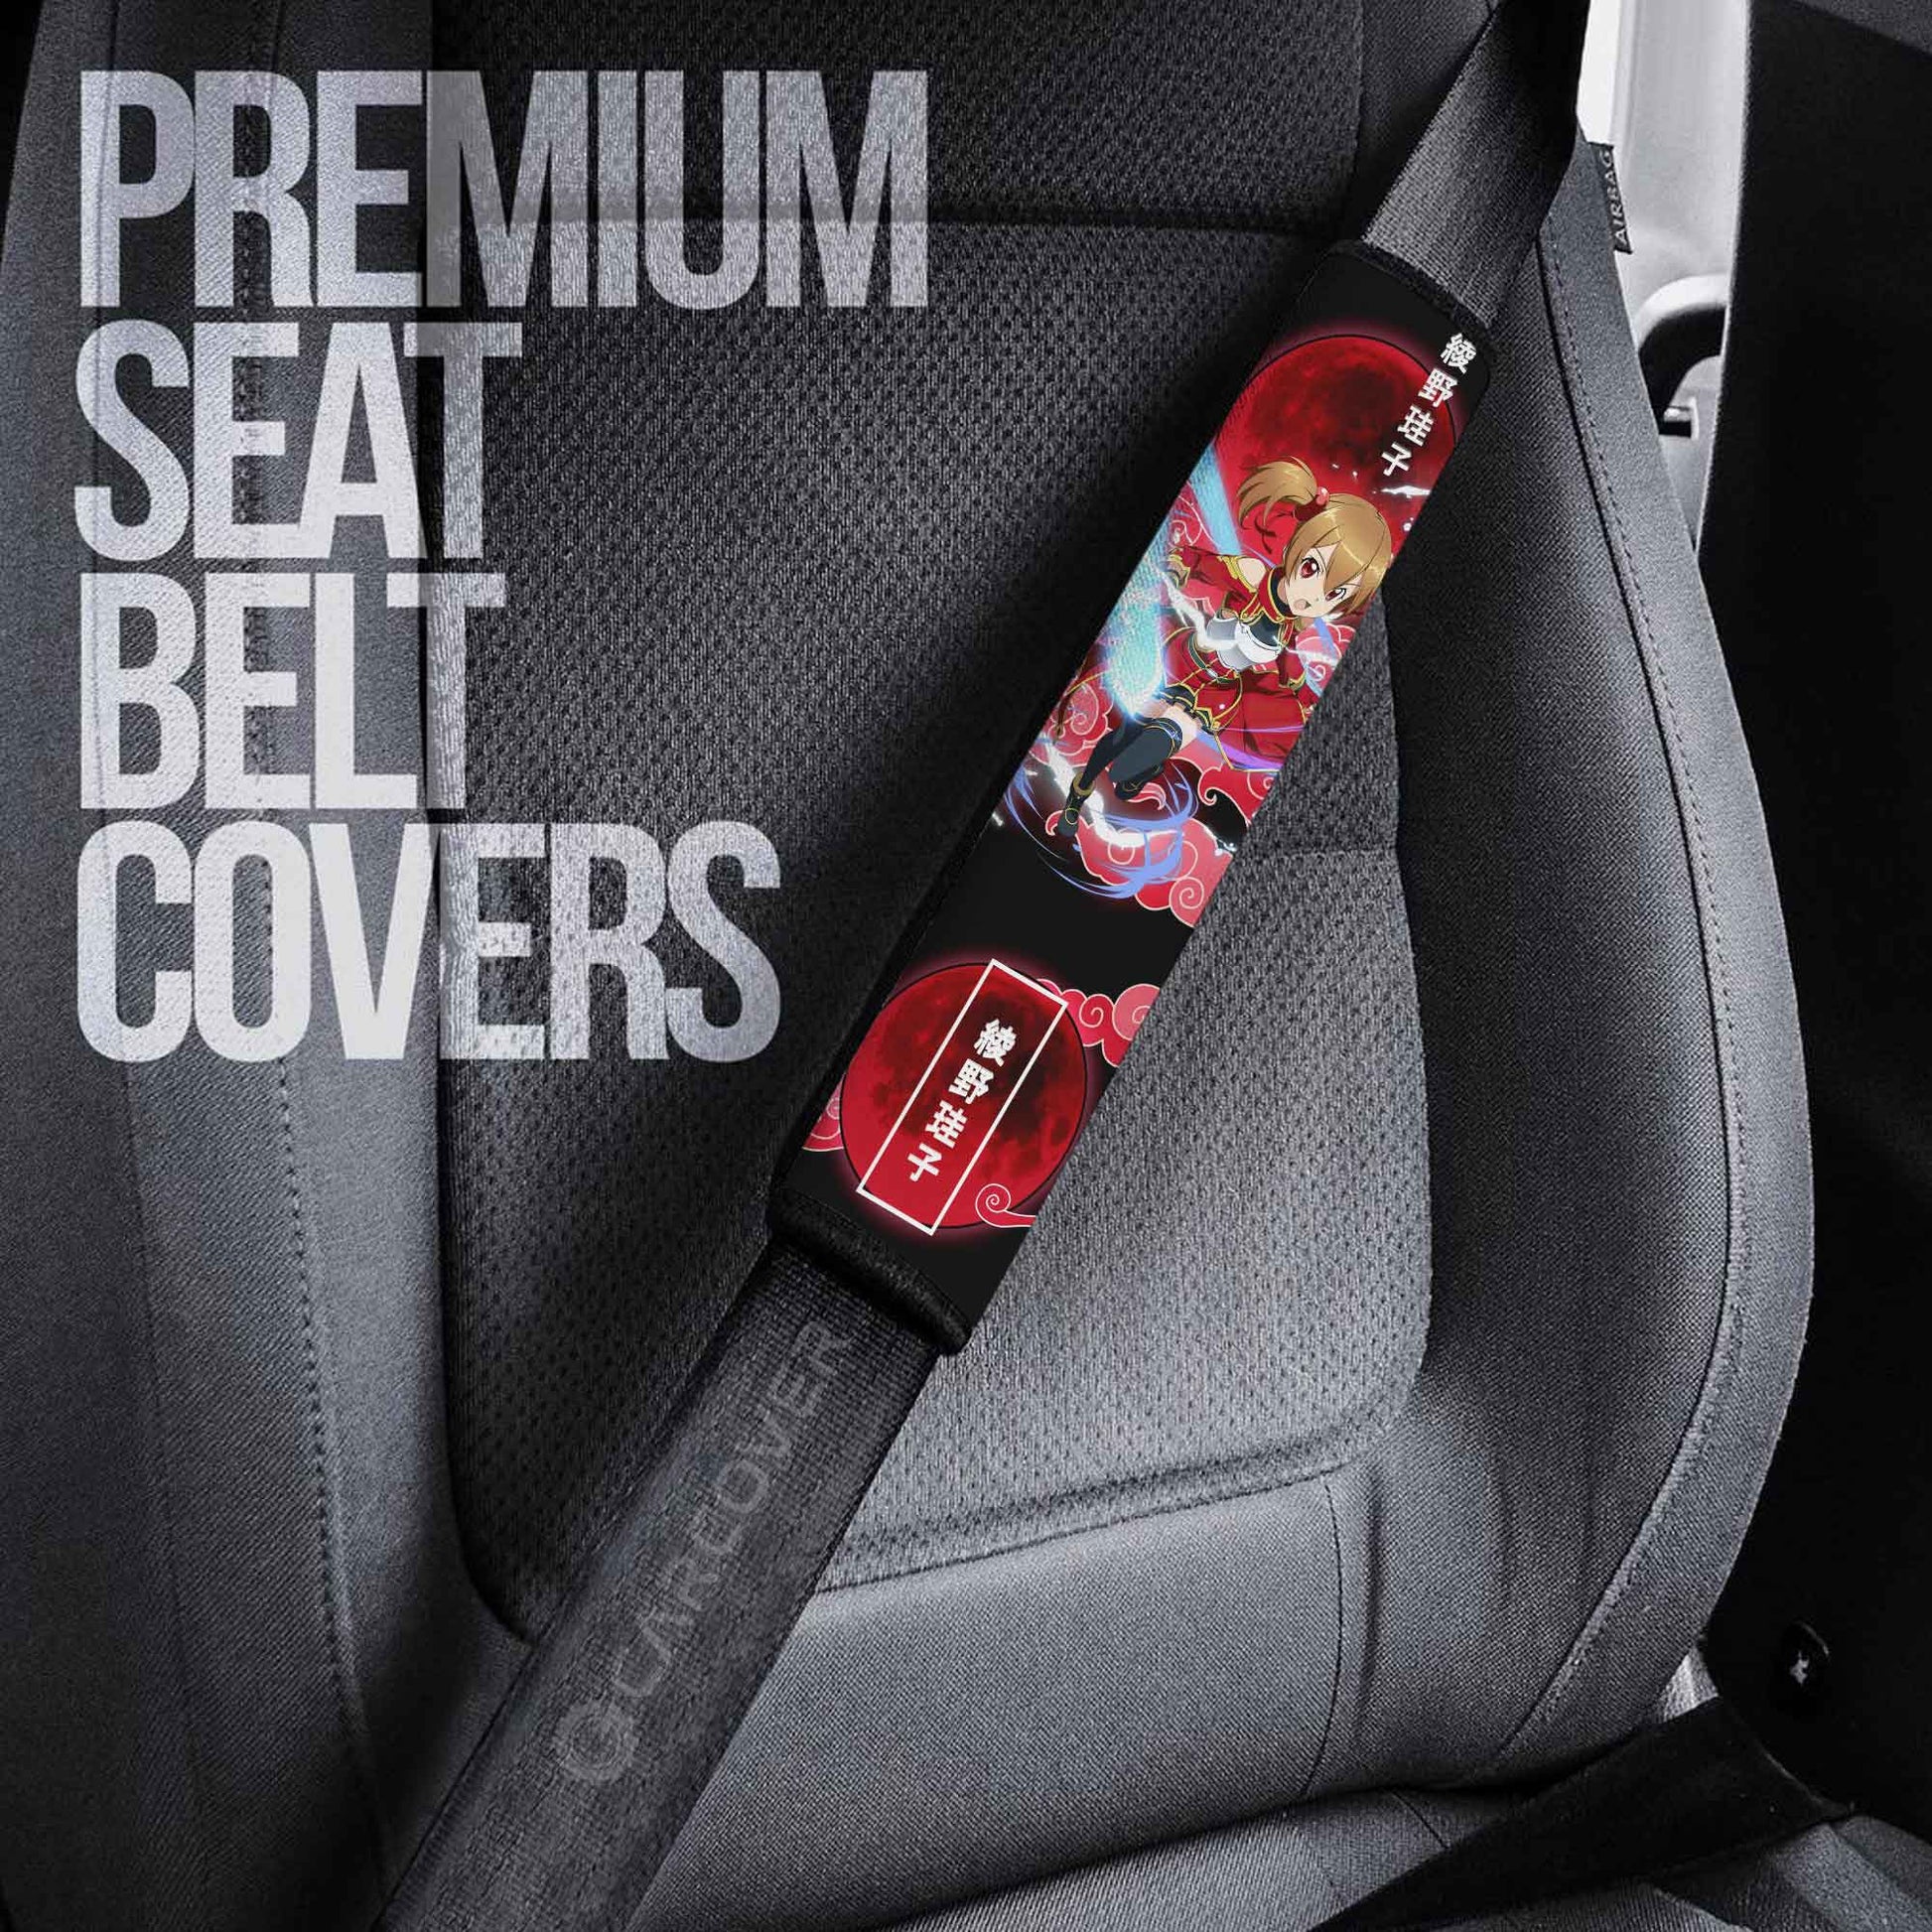 Ayano Keiko Seat Belt Covers Custom Anime Sword Art Online Car Accessories - Gearcarcover - 3